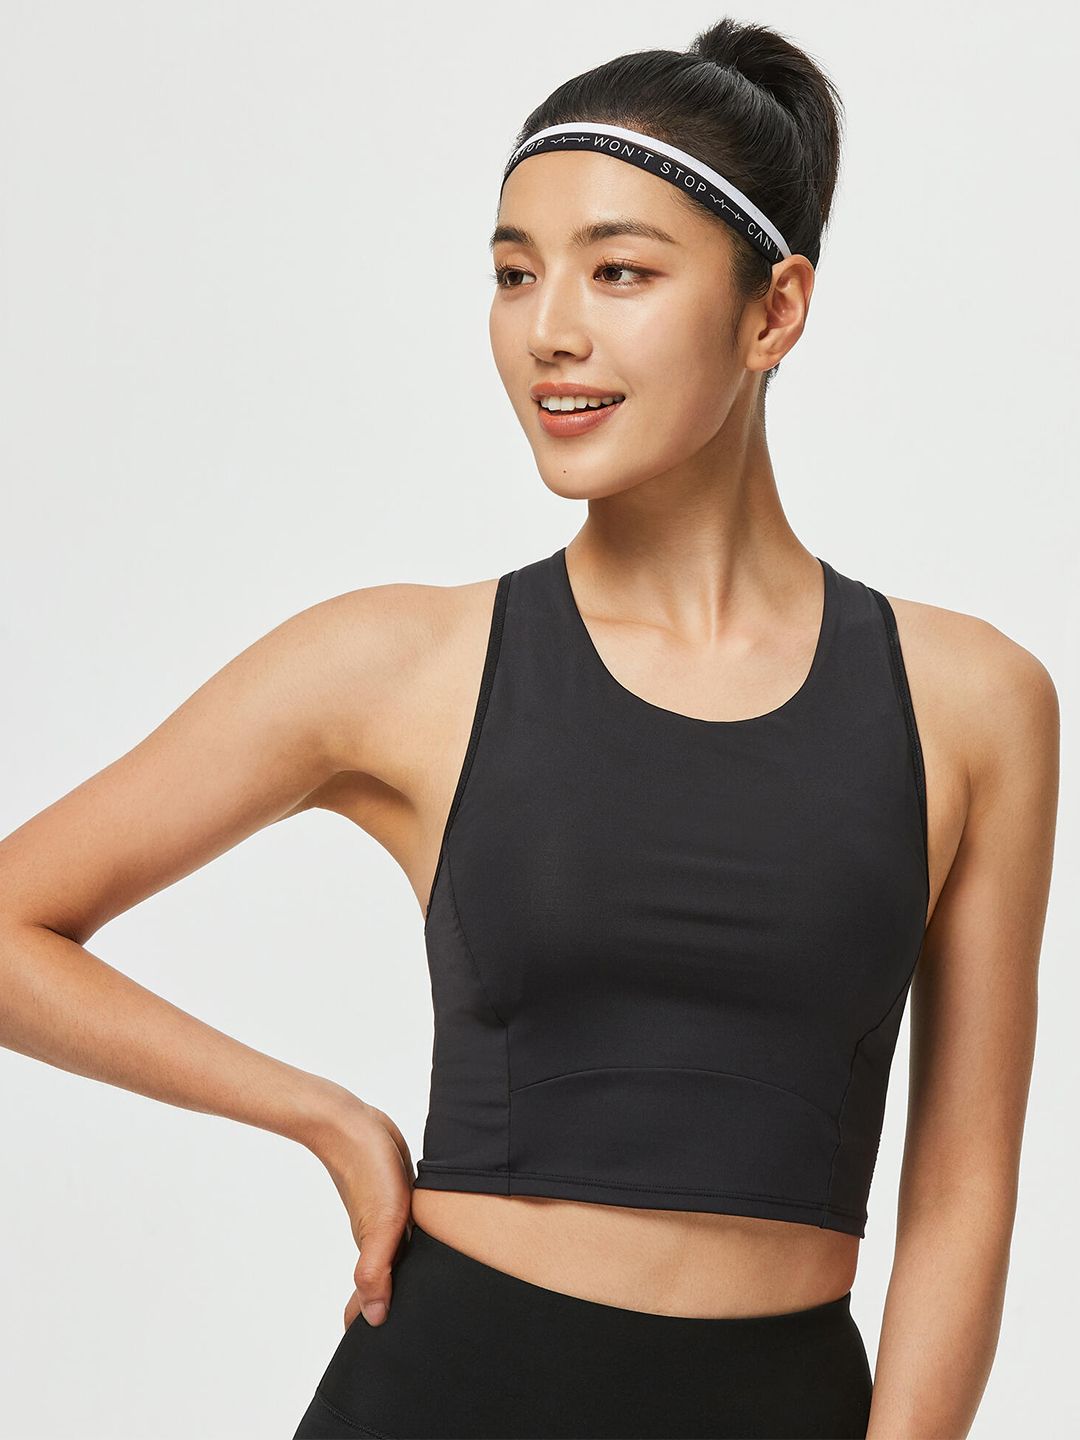 Domyos By Decathlon Black Moderate Support Cropped Fitness Sports Bra 540  Price in India, Full Specifications & Offers